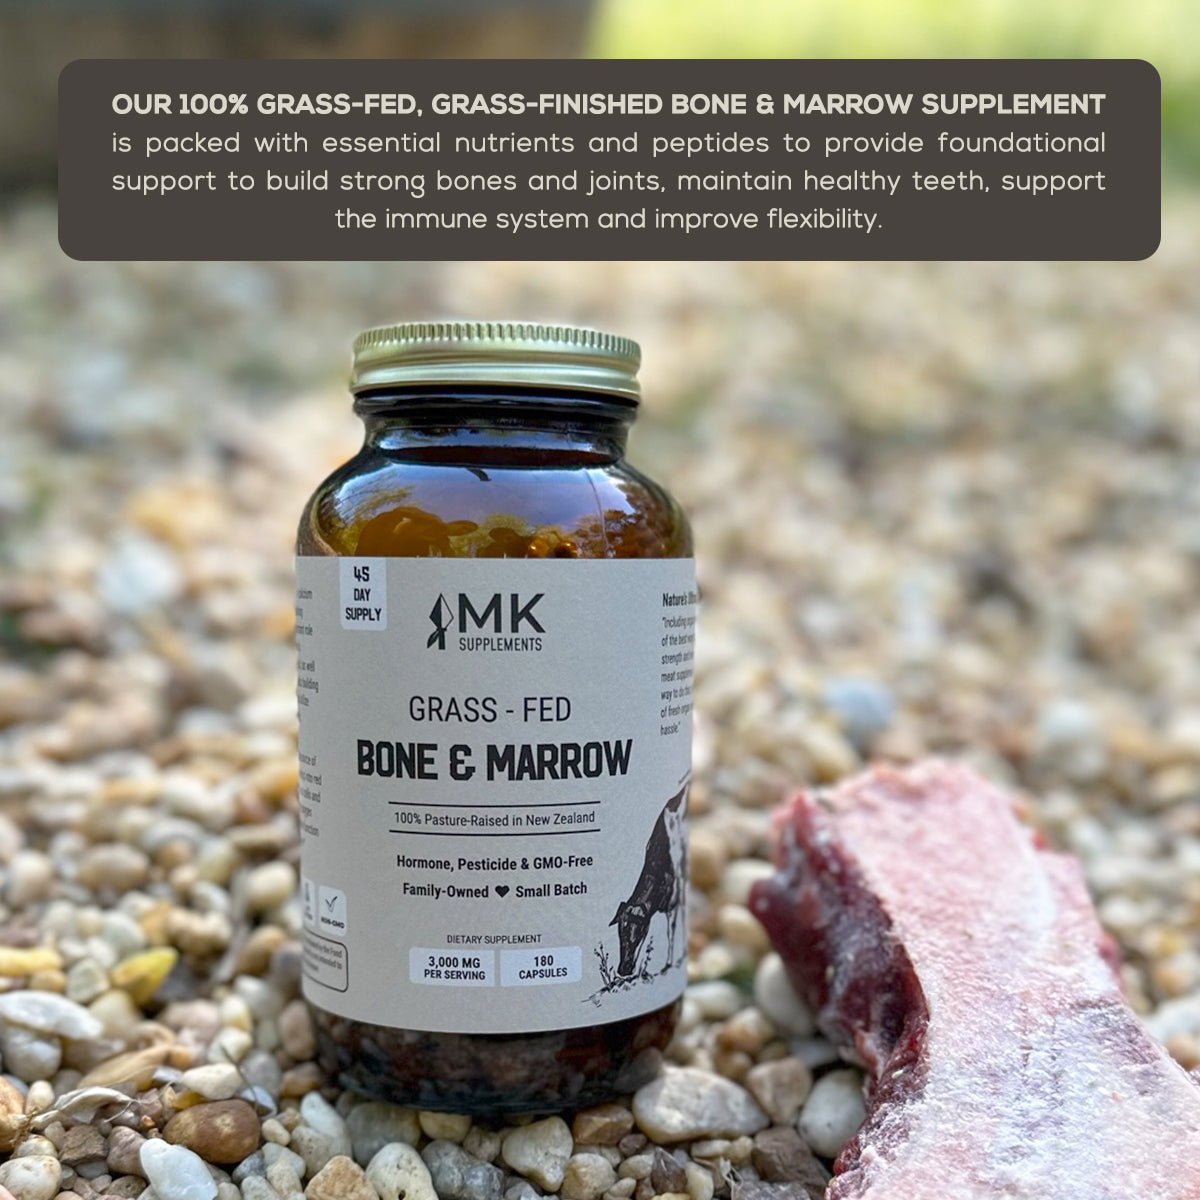 MK Supplements Grass-Fed Bone & Marrow - 100% Grass-Fed and Finished